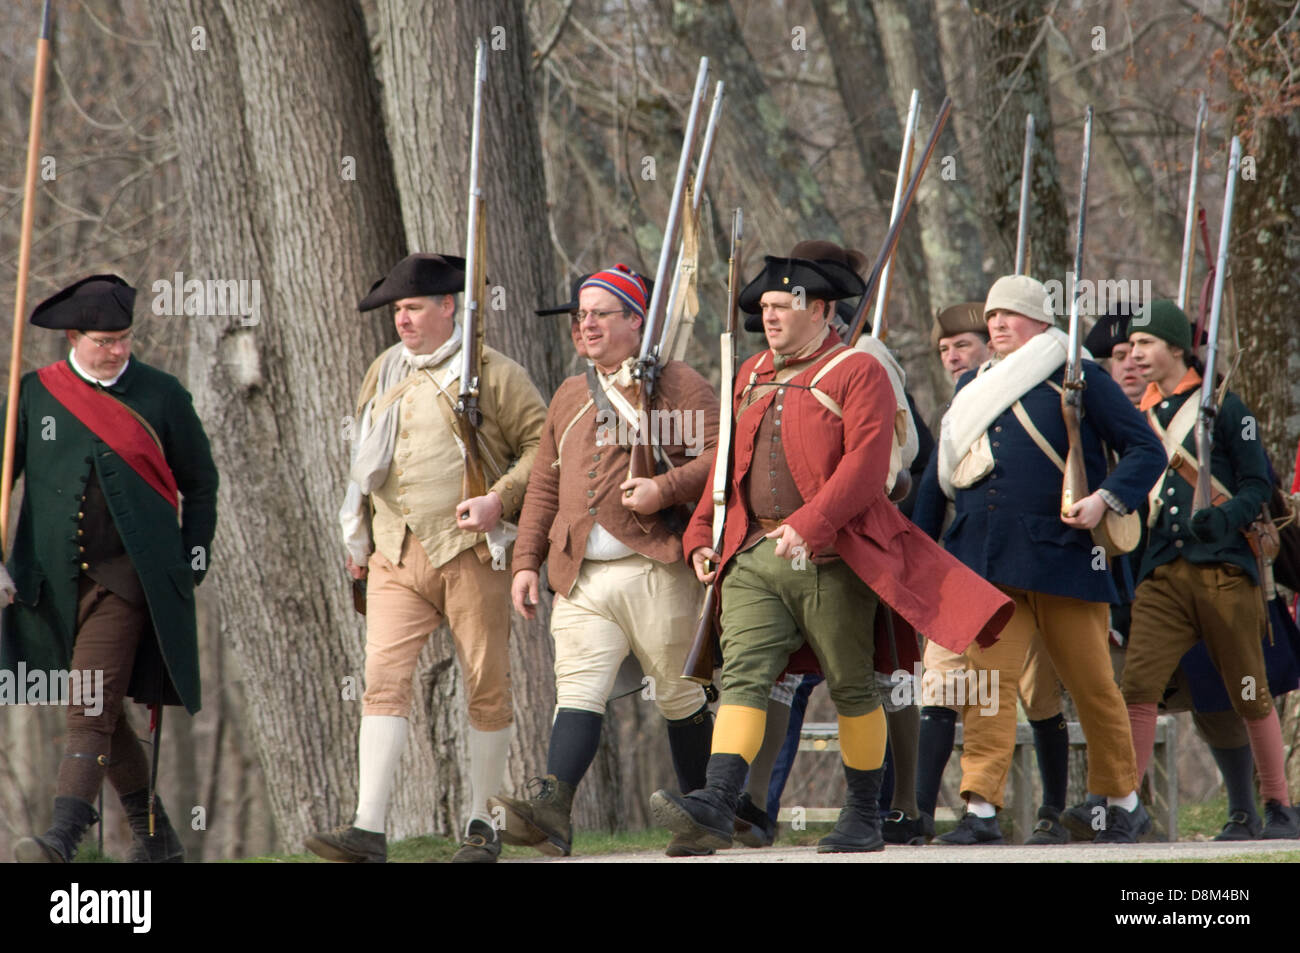 Minutemen reenactors marching to battle the British at the Battle of Concord, Minuteman National Historical Park, Concord MA. Digital photograph Stock Photo